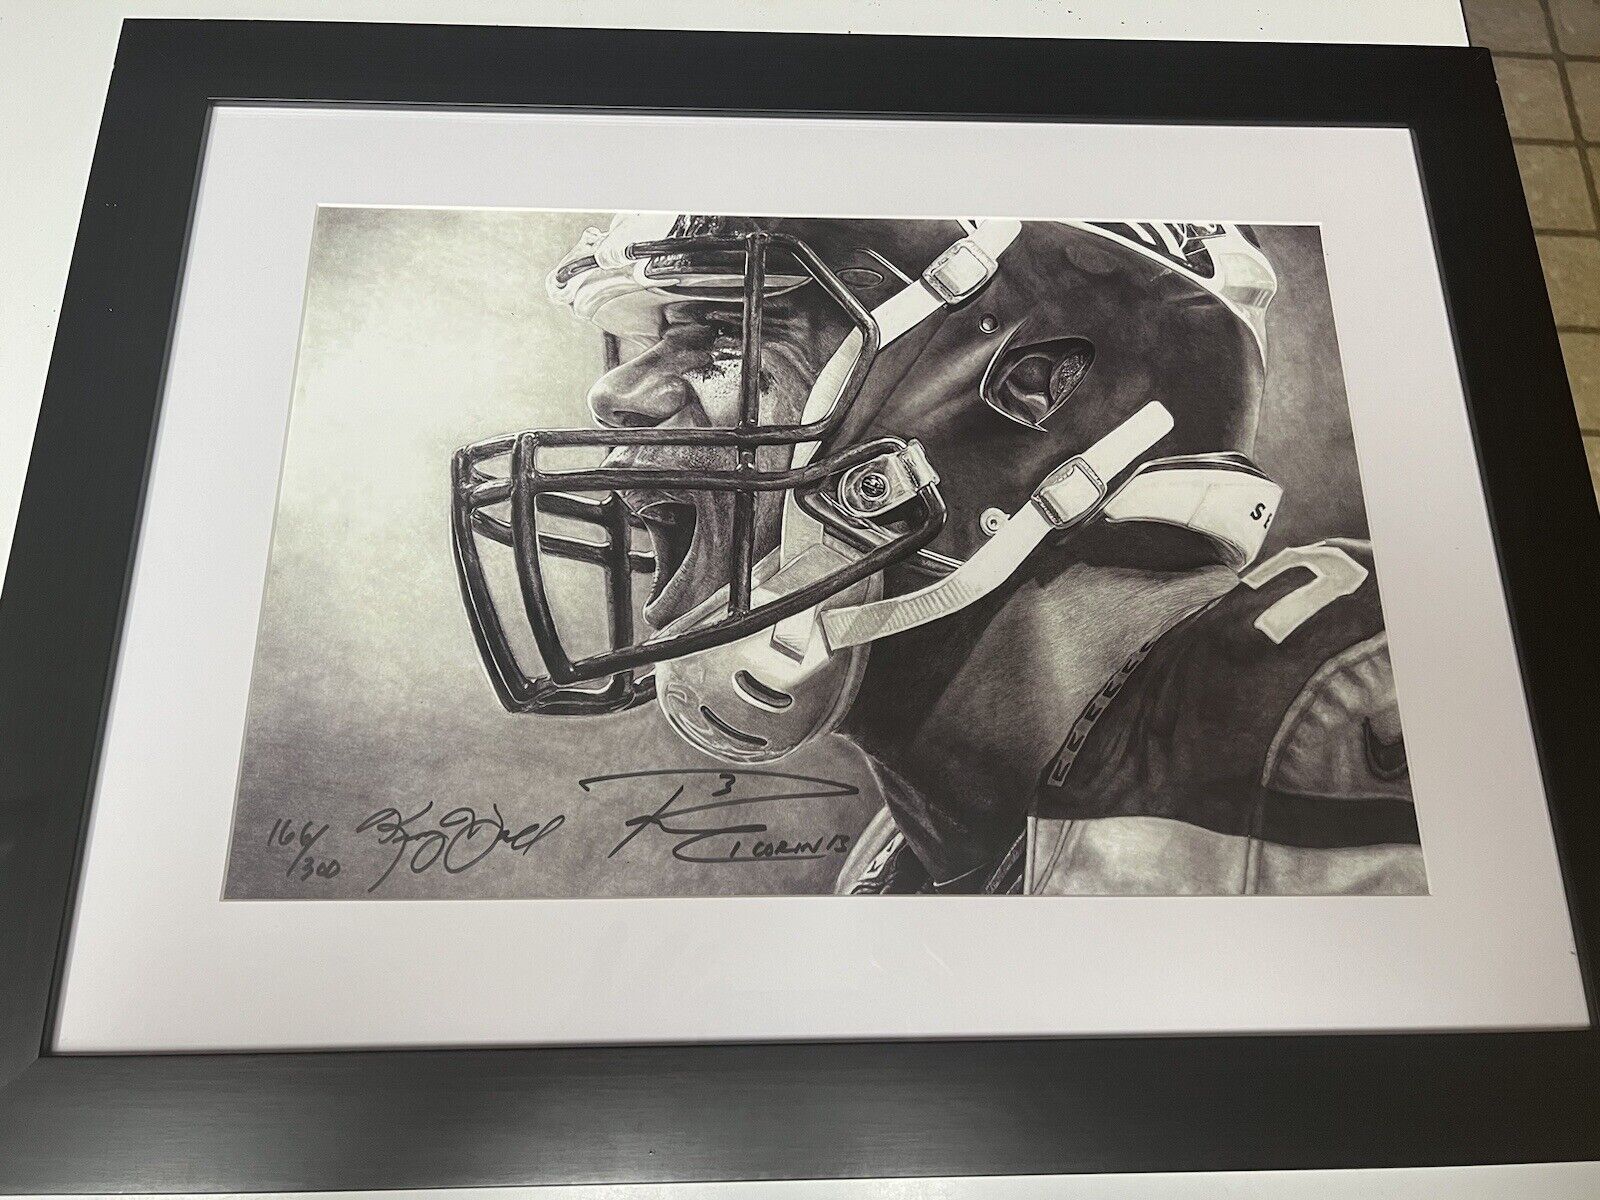 Russell Wilson Hand Signed Lithograph Keegan Hall Hand Signed Framed #166 Of 300